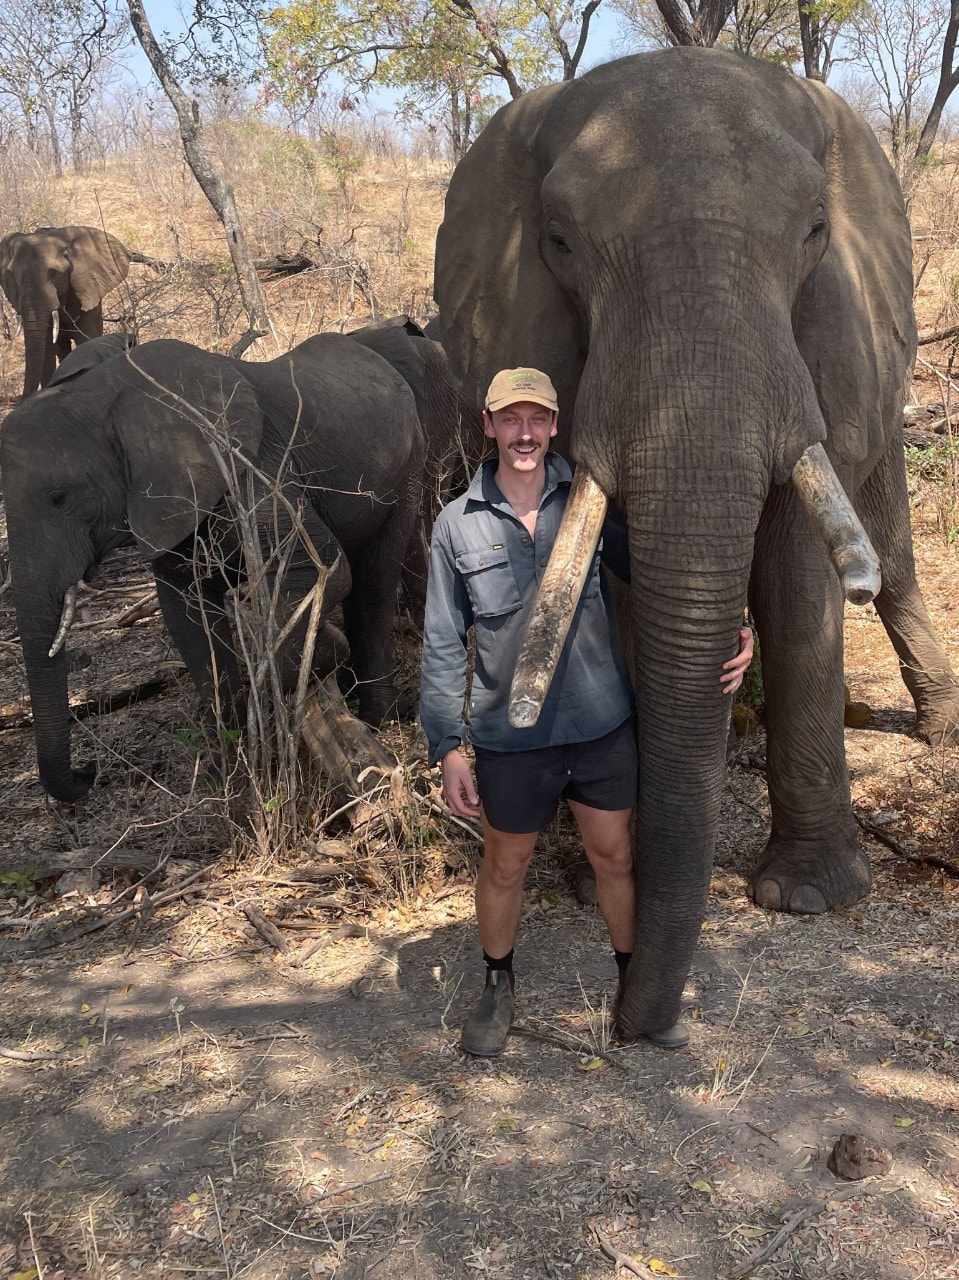 Researcher Patt Finnerty with elephants in the field in South Africa.